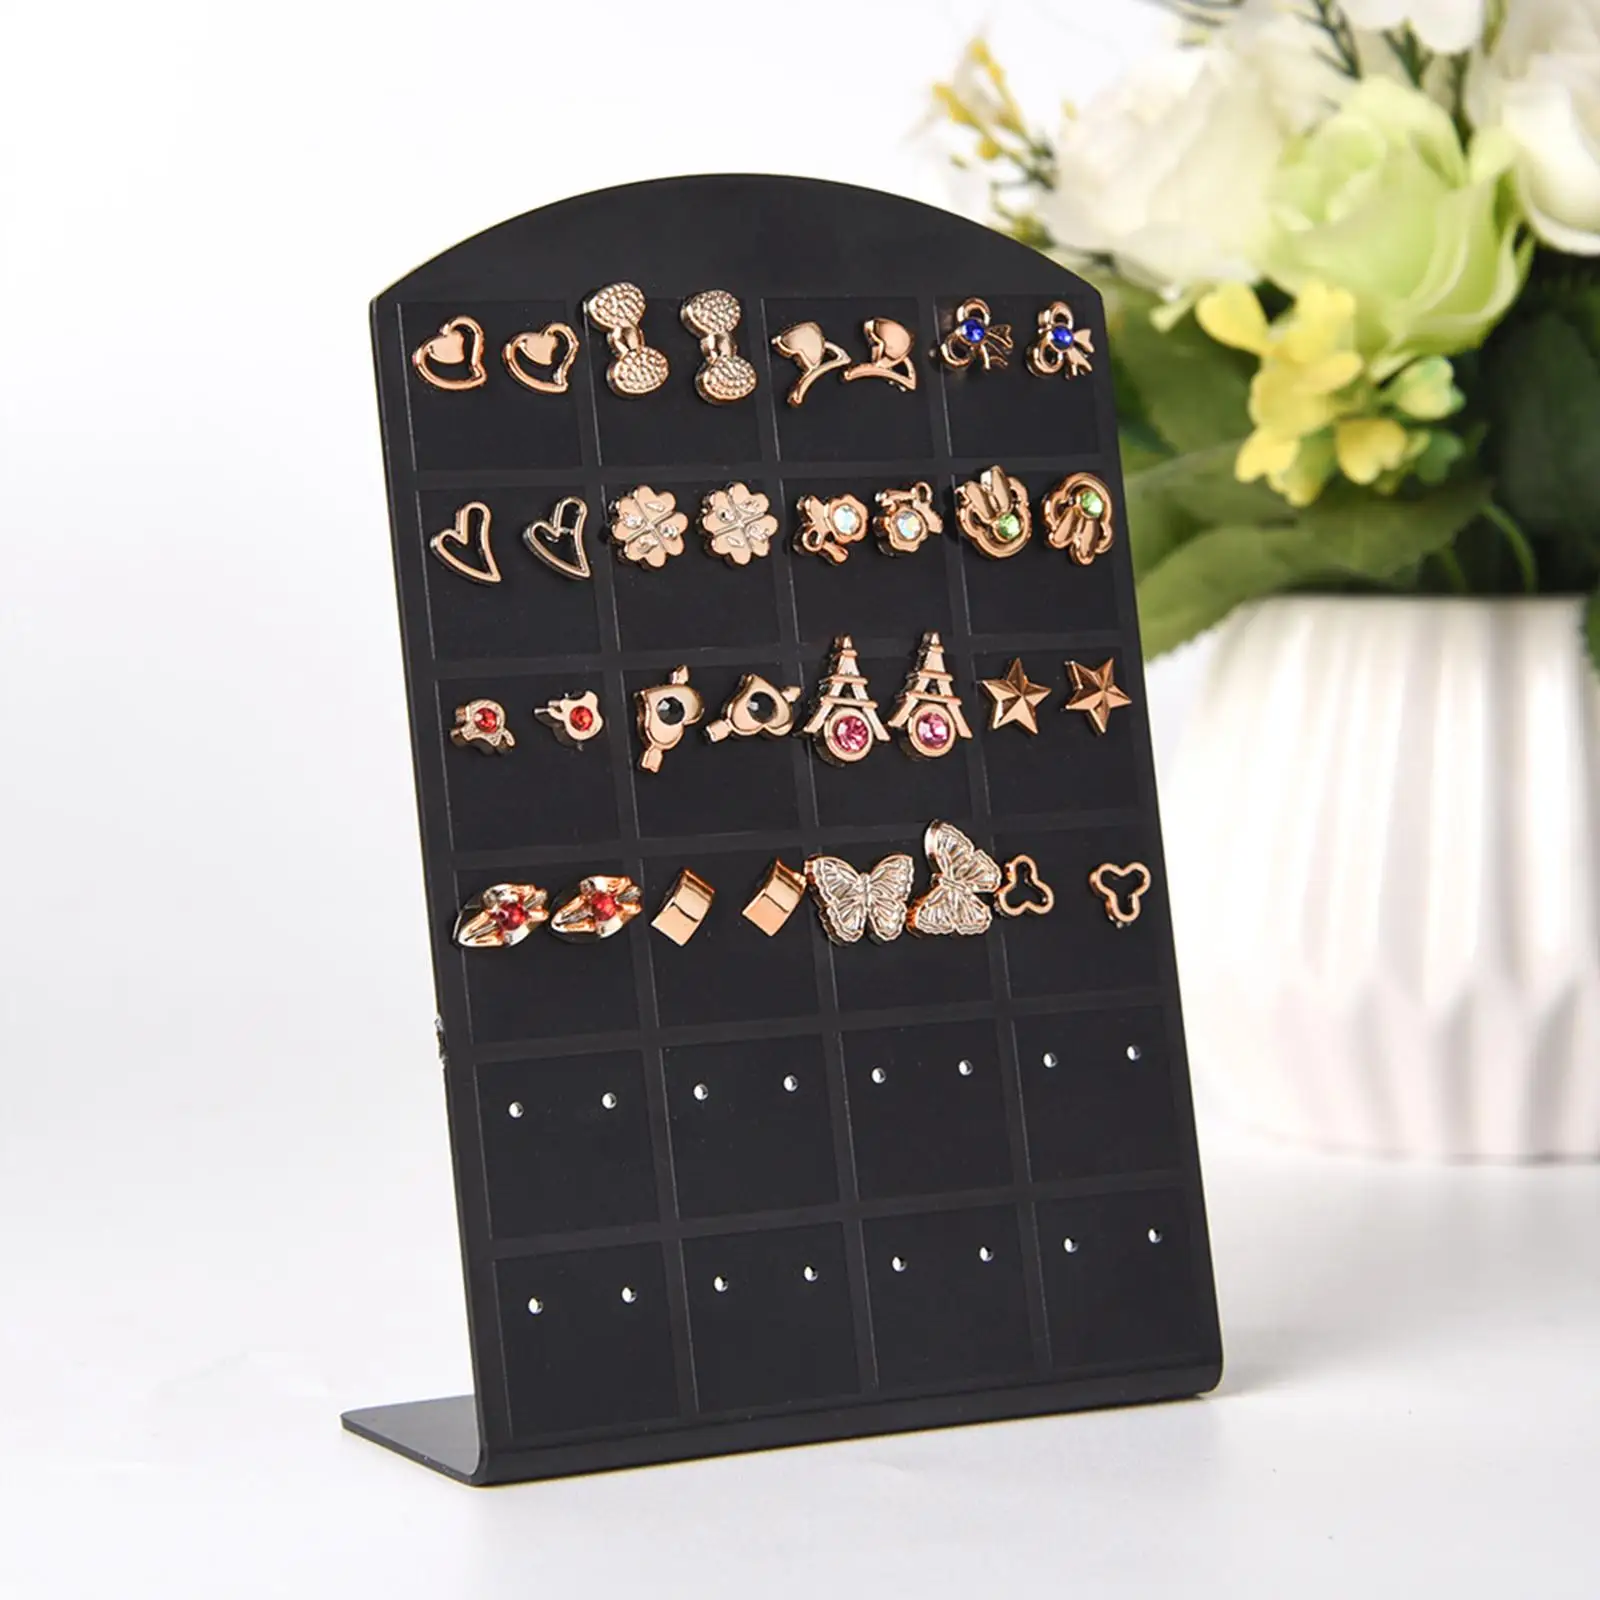 48 Holes Earring Holder Stand L Shape Portable Stud Earrings Display Stand Earring Organizer Ear Stud Storage for Personal